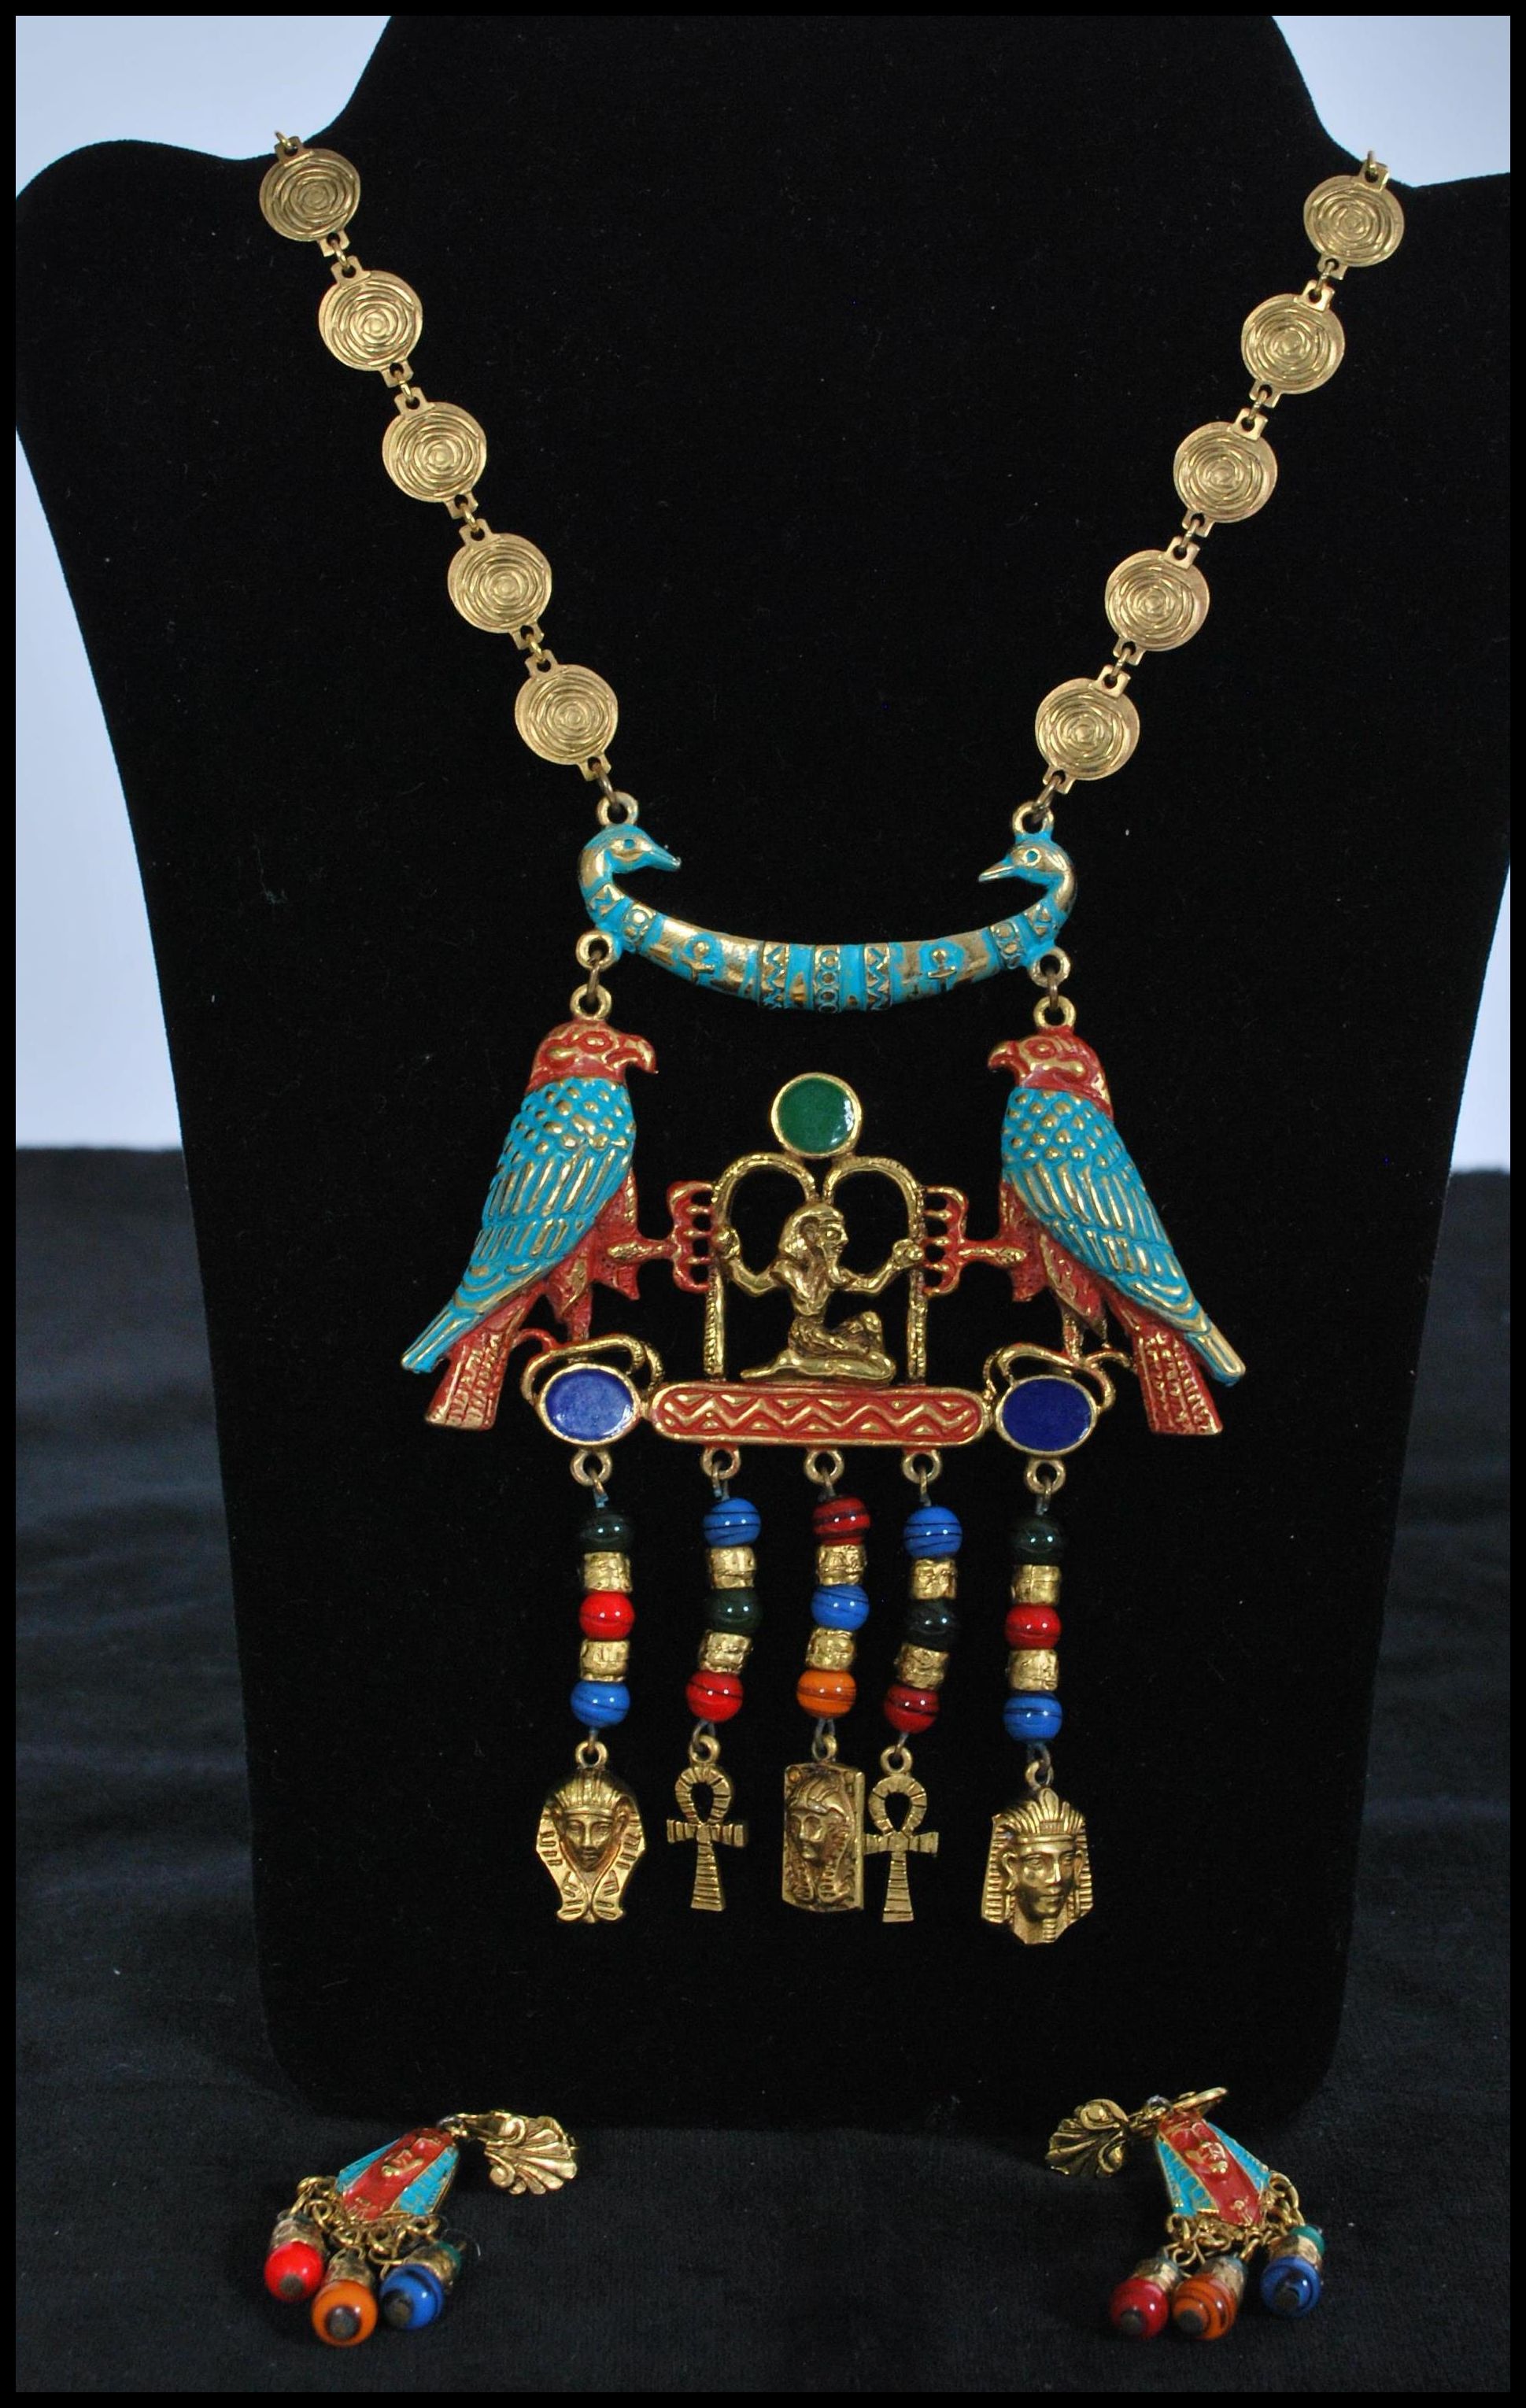 A 1960s signed Art Egyptian revival necklace and earring set by Arthur Pepper. Measures 18 inches